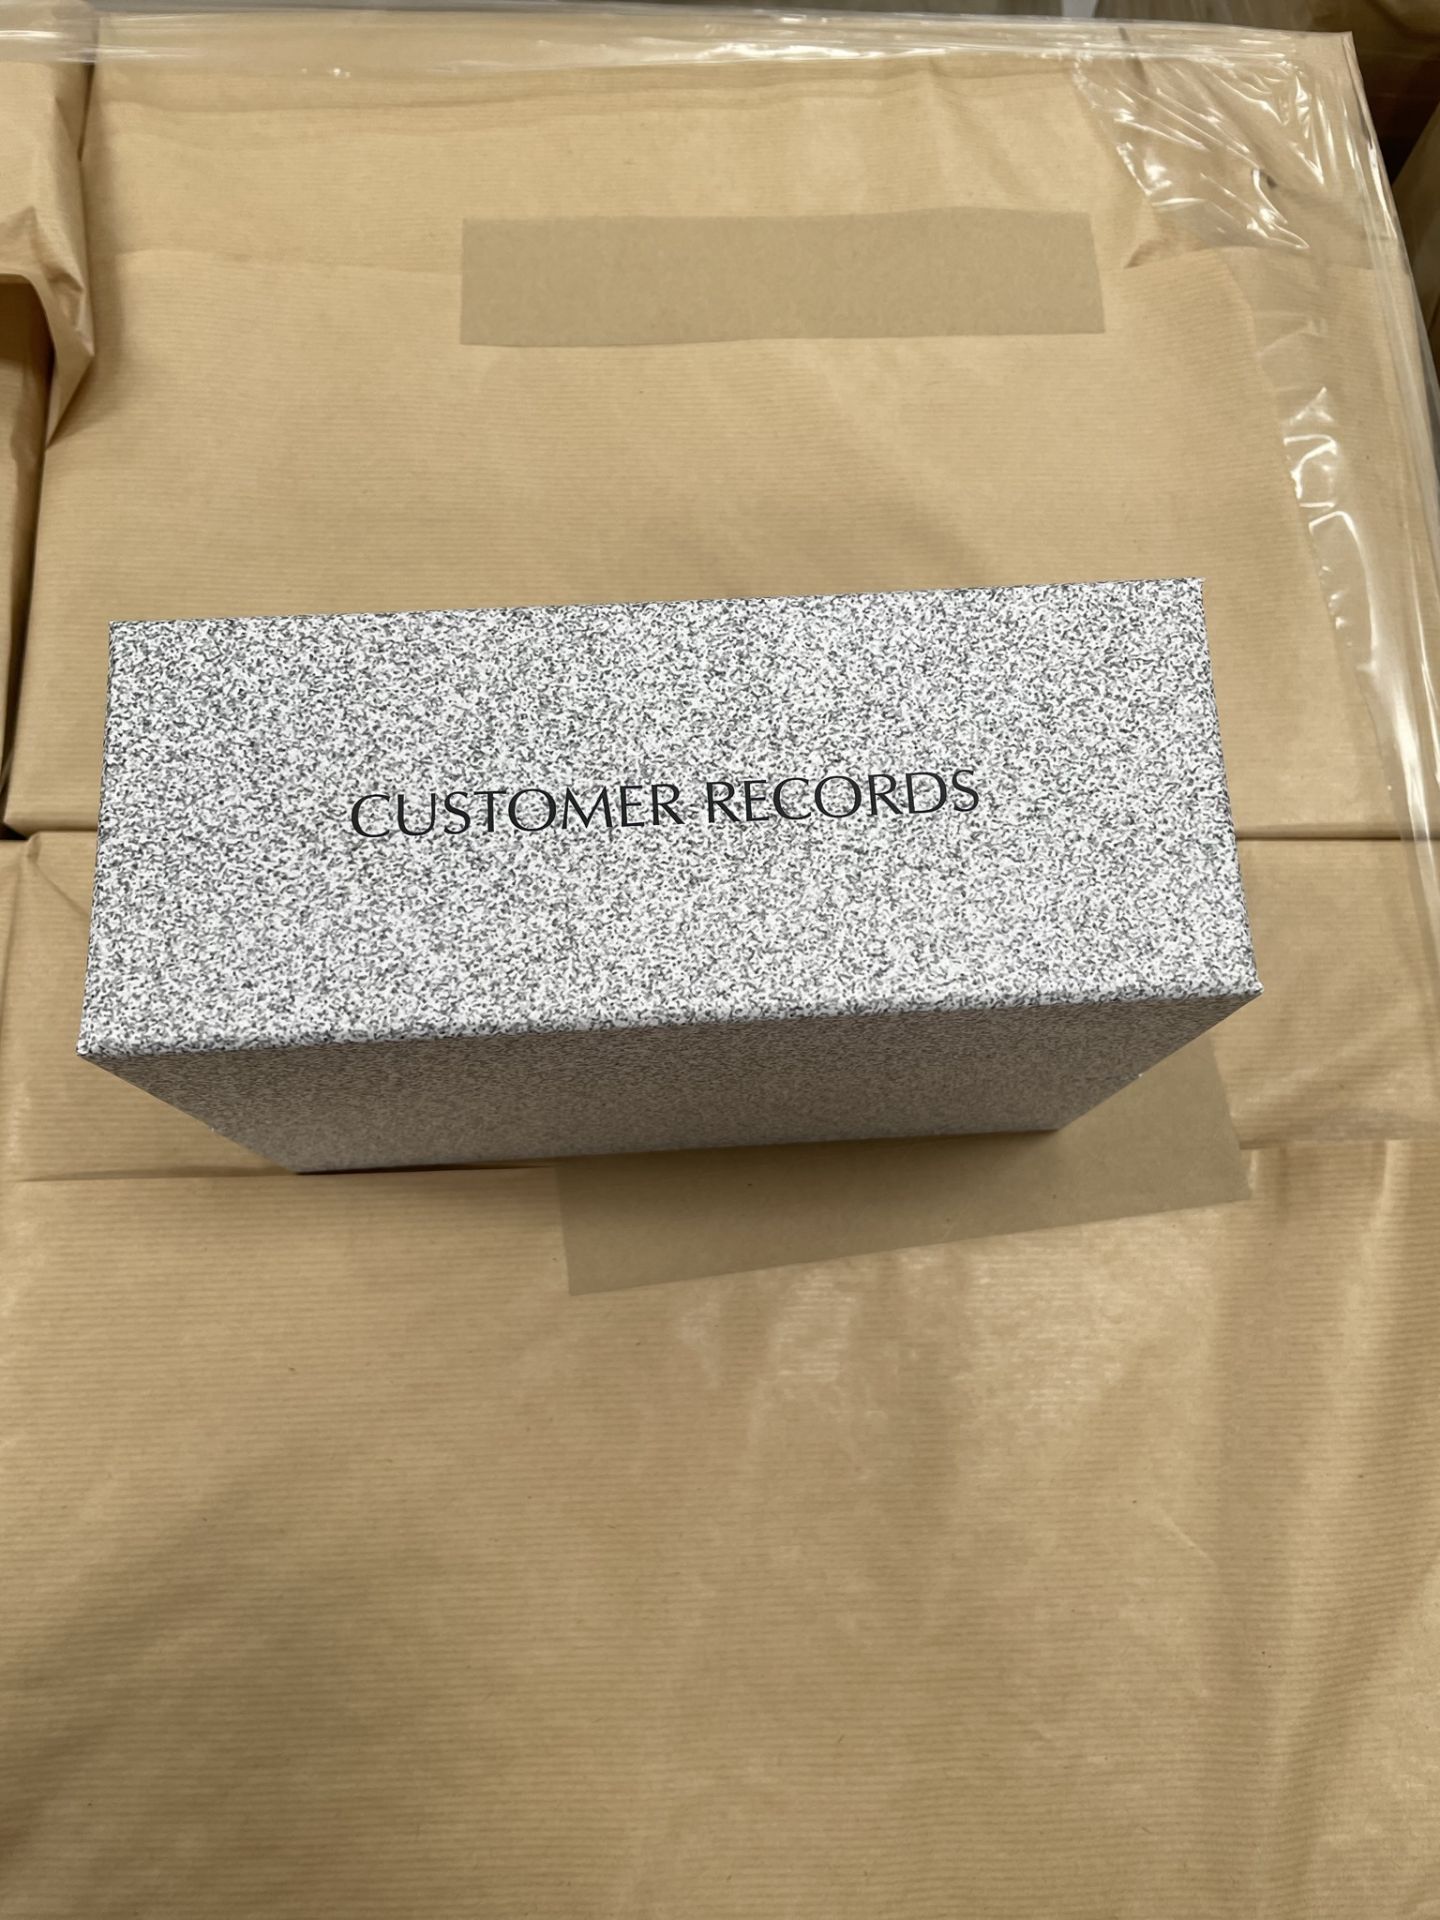 Approximately 120 x Quirepale Customer Record Boxes in Grey - Image 2 of 3